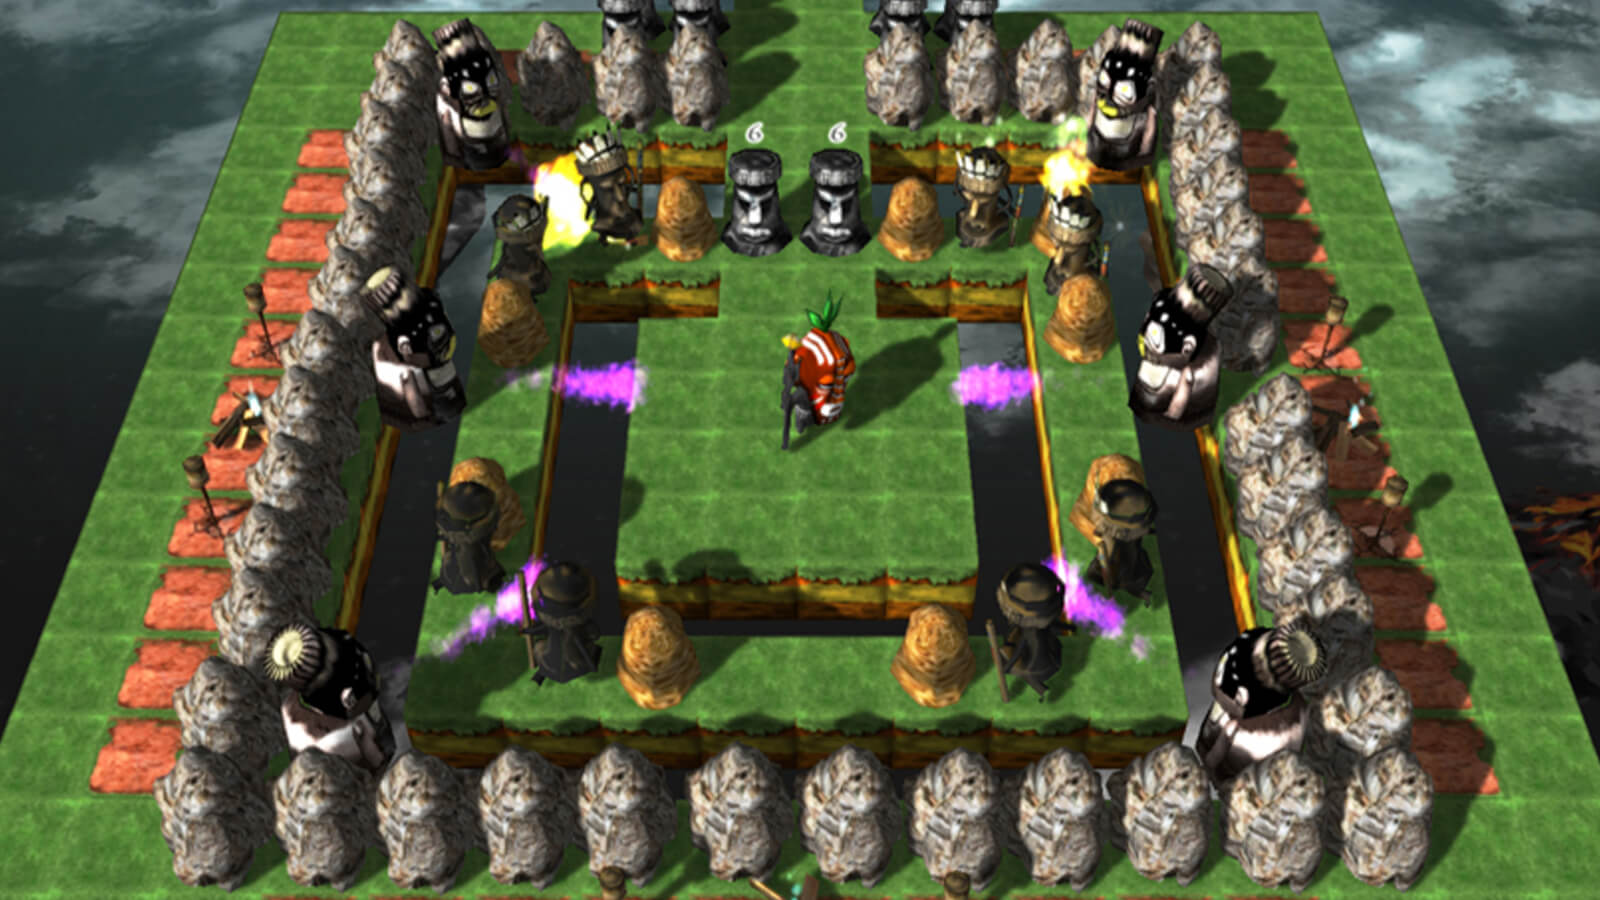 The player's character stands at the center of a green platform in the sky surrounded by rows of enemies